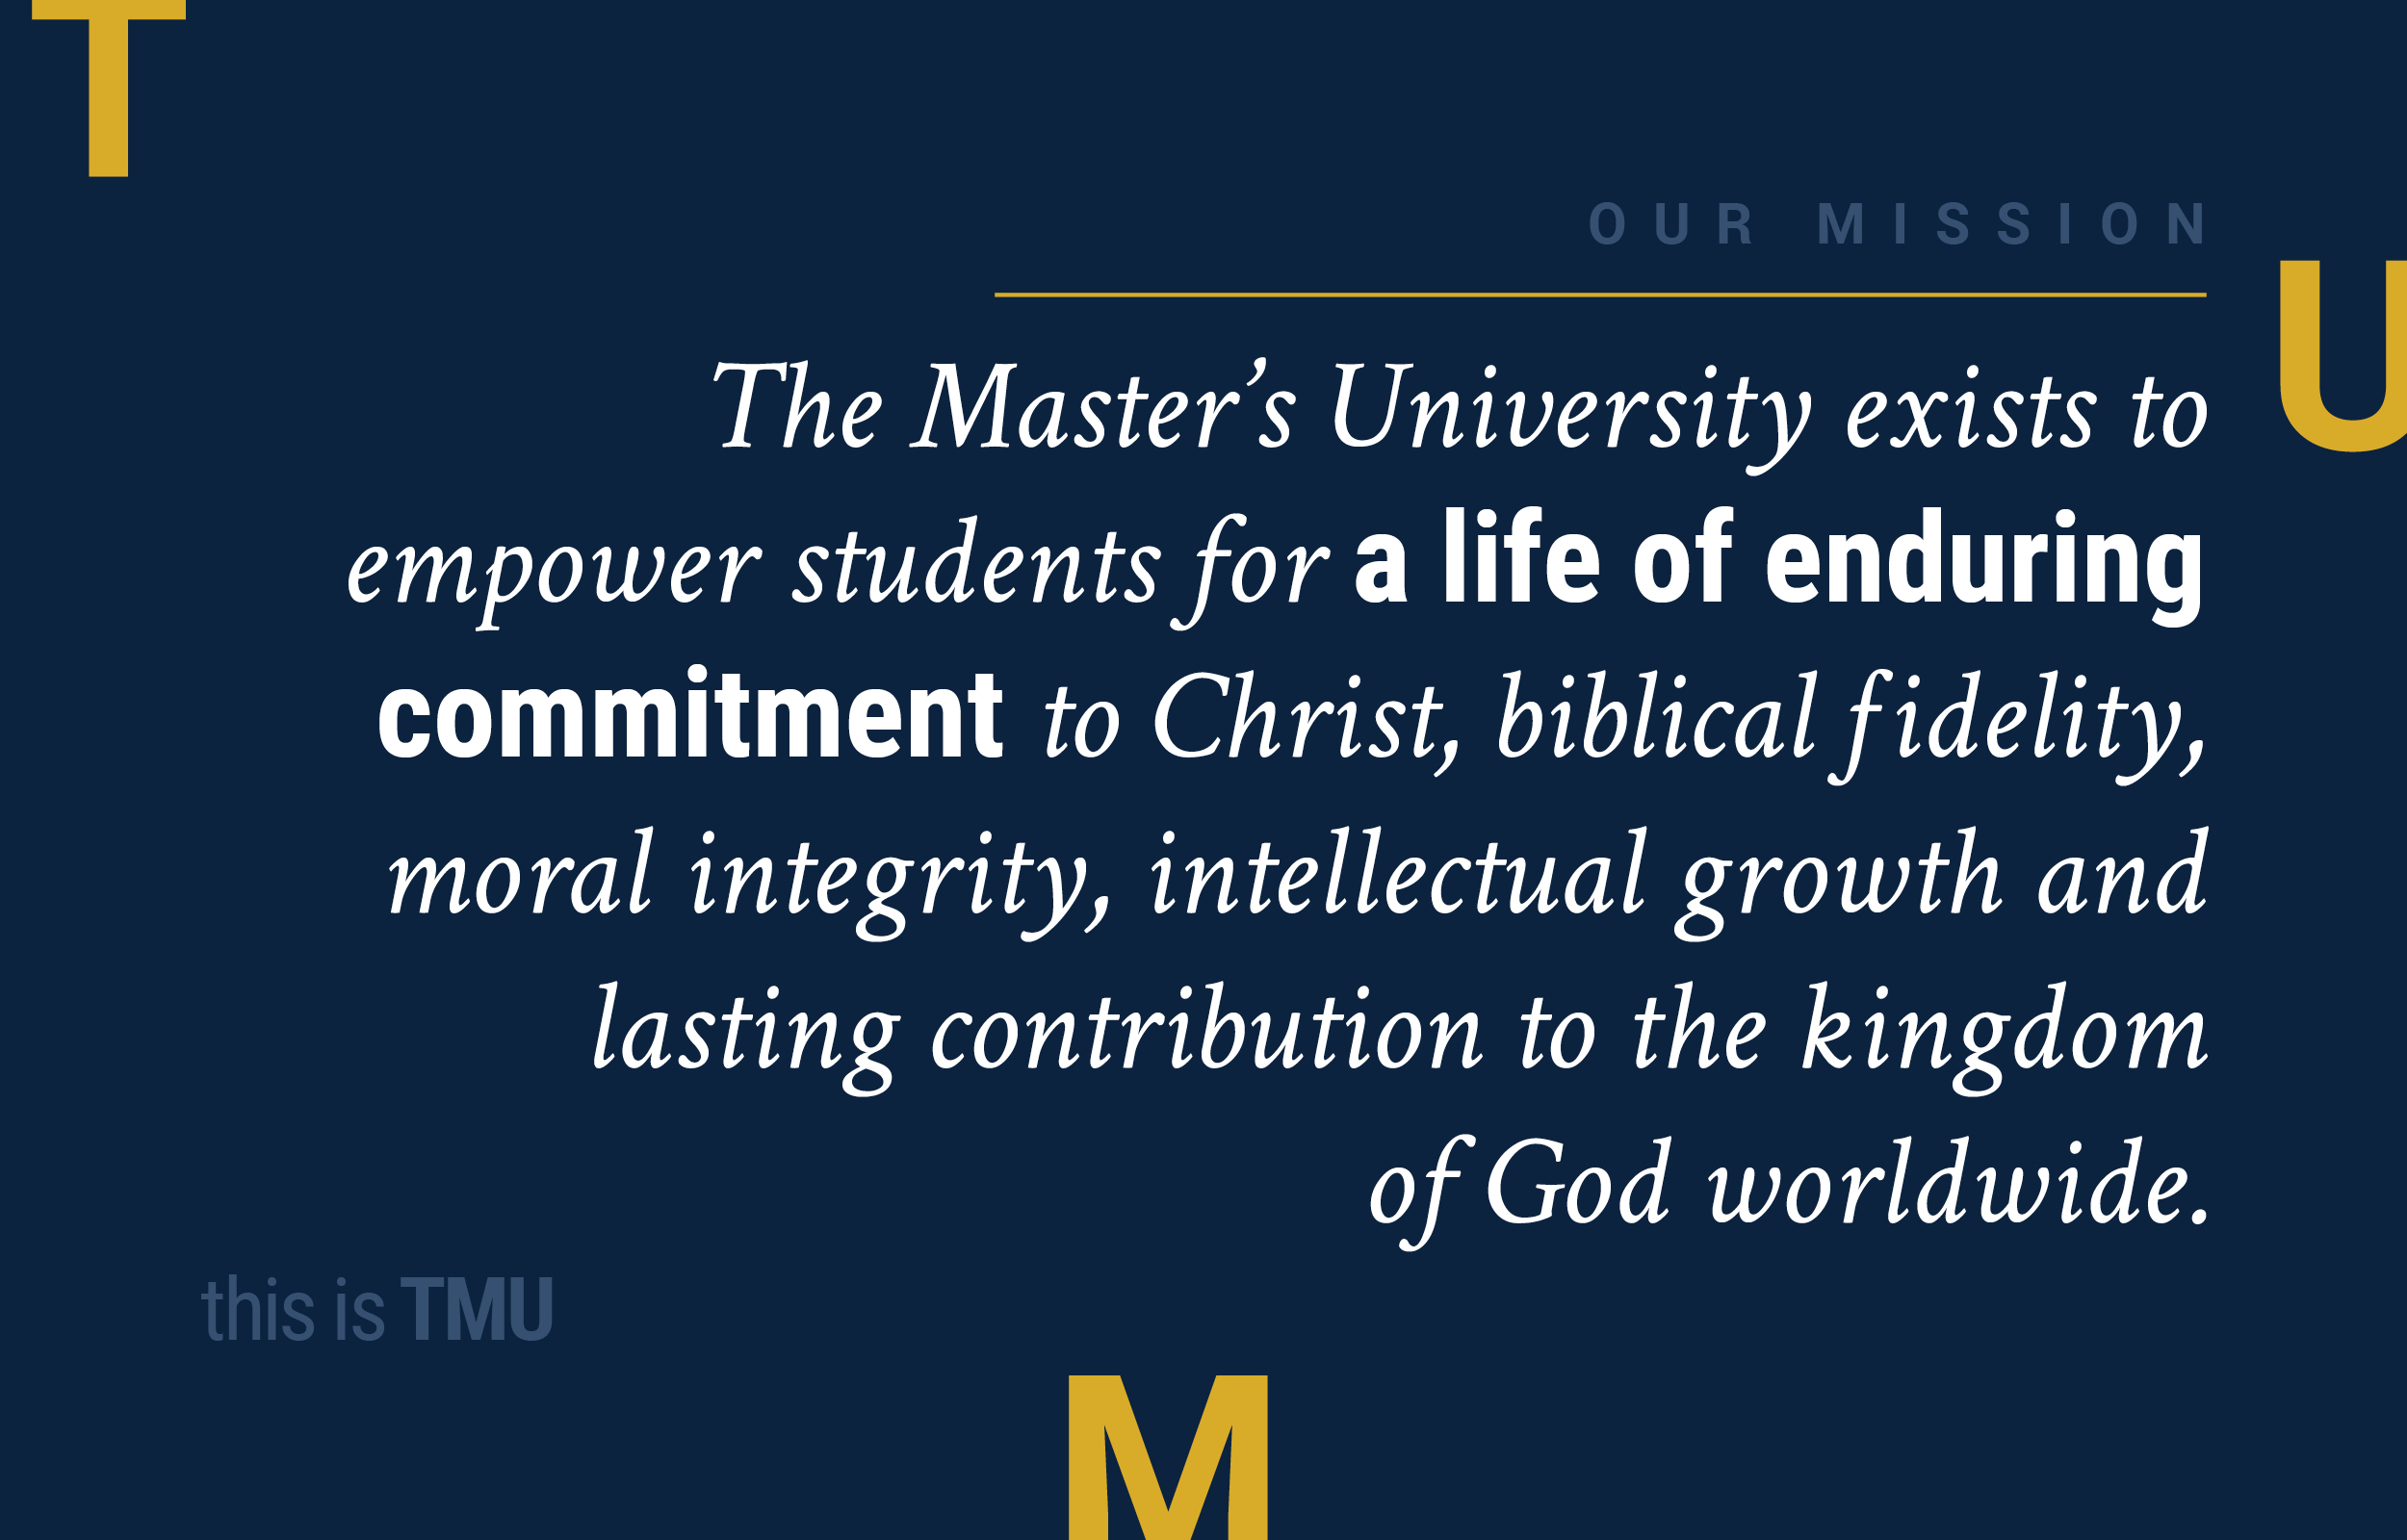 This is TMU: Our Mission image